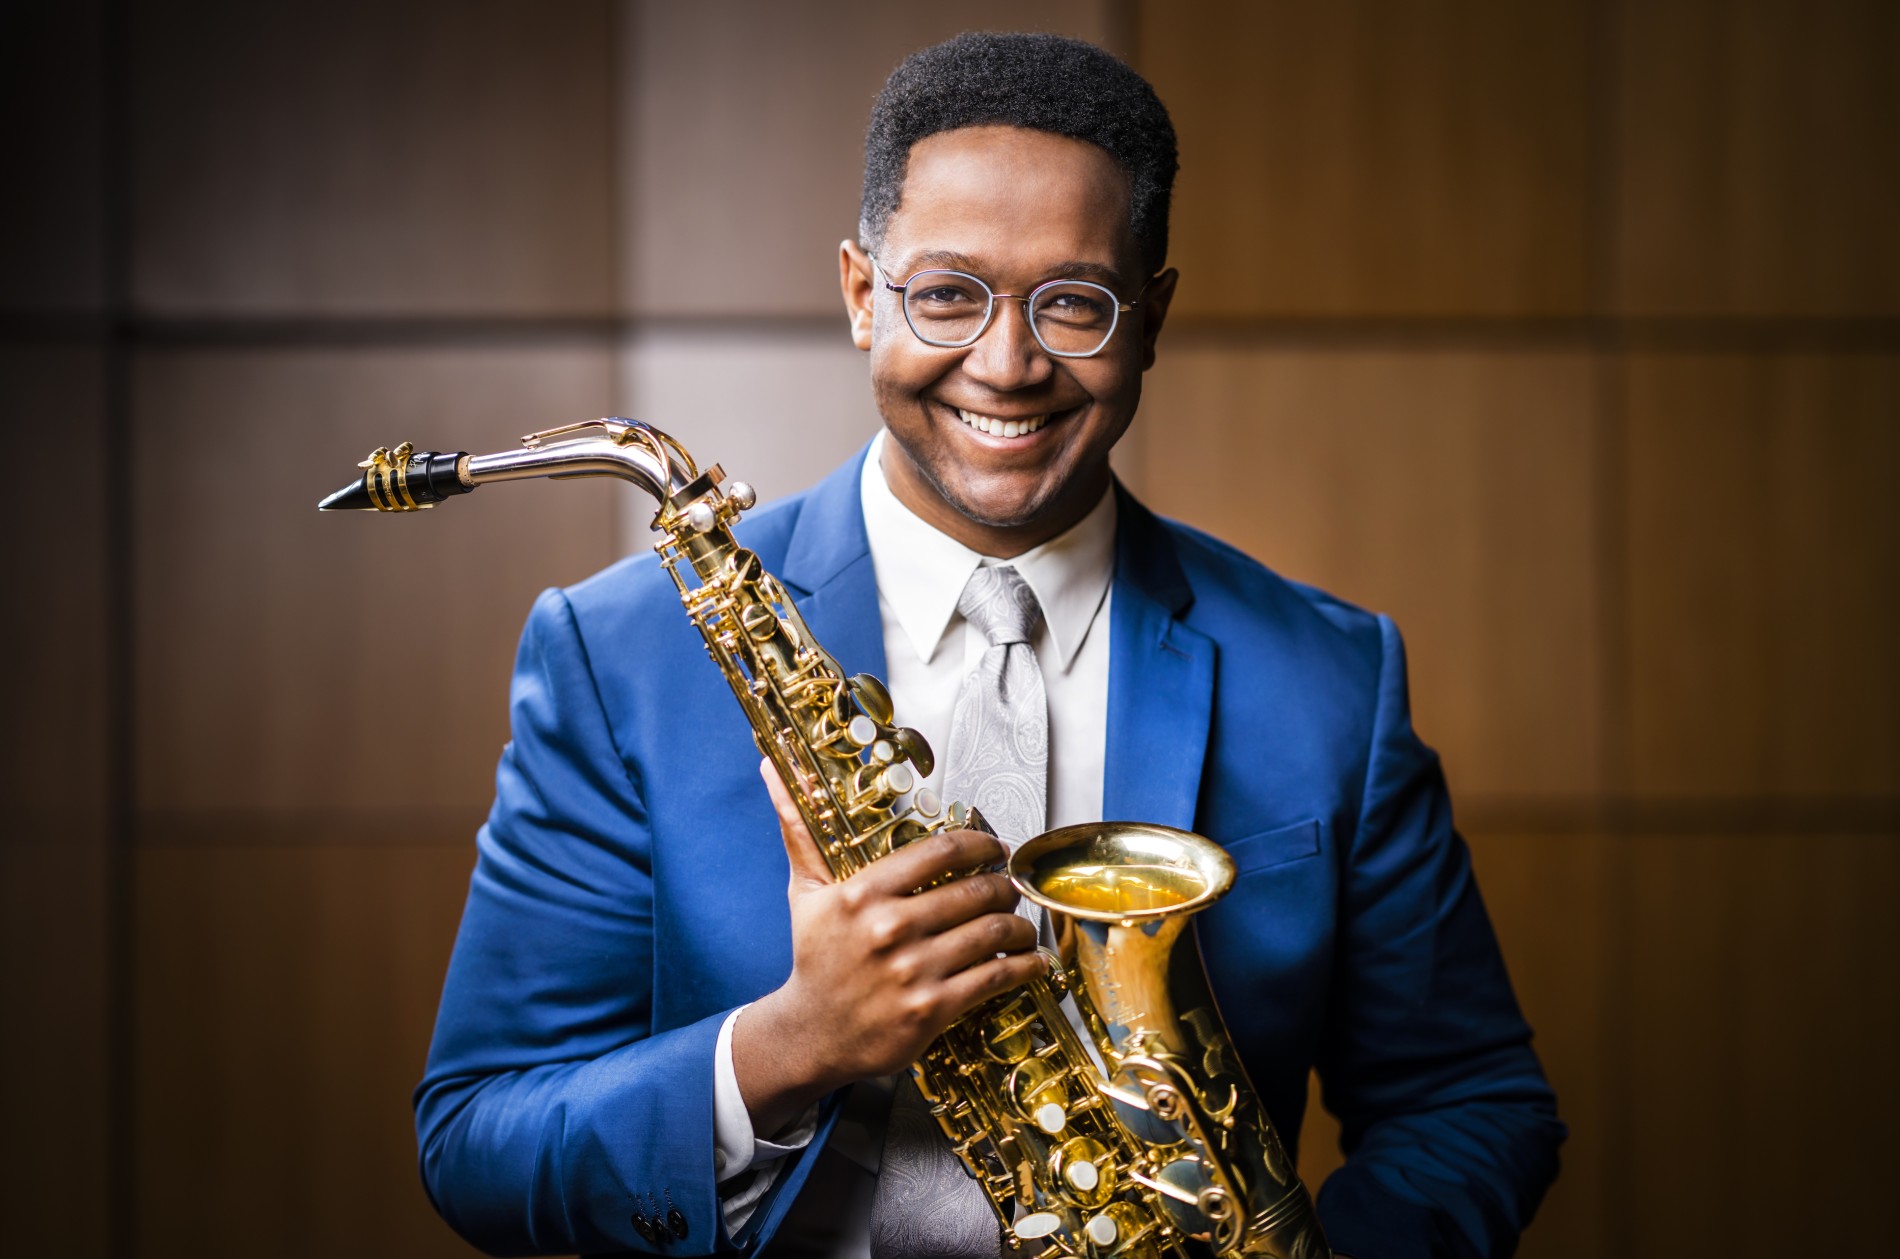 Saxophonist Steven Banks, wearing a blue suite and holding his instrument up